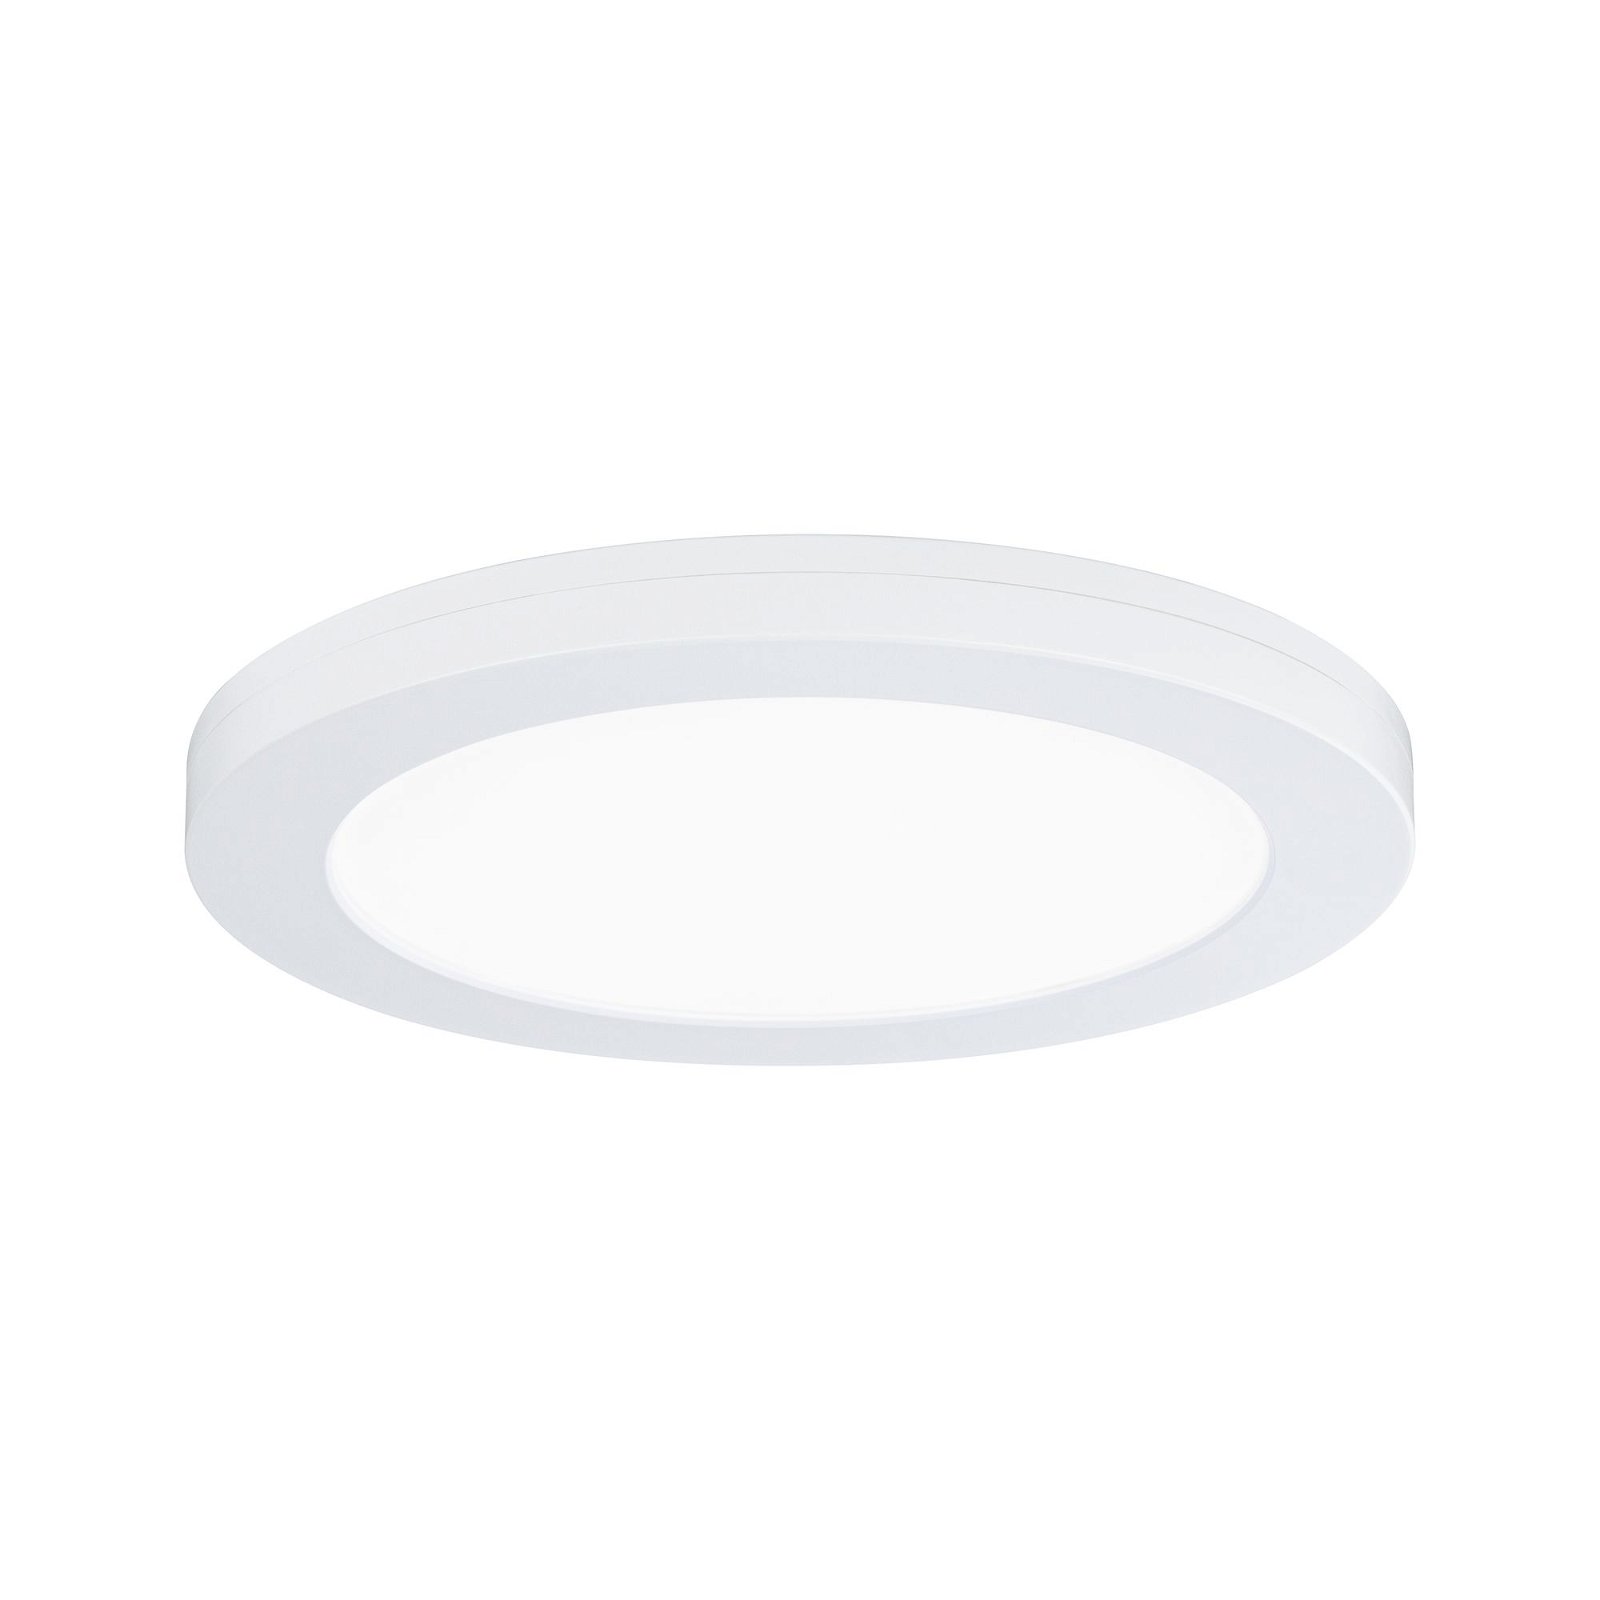 LED-inbouwpaneel 2in1 Cover-it rond 225mm 16,5W 1200lm 4000K Wit mat